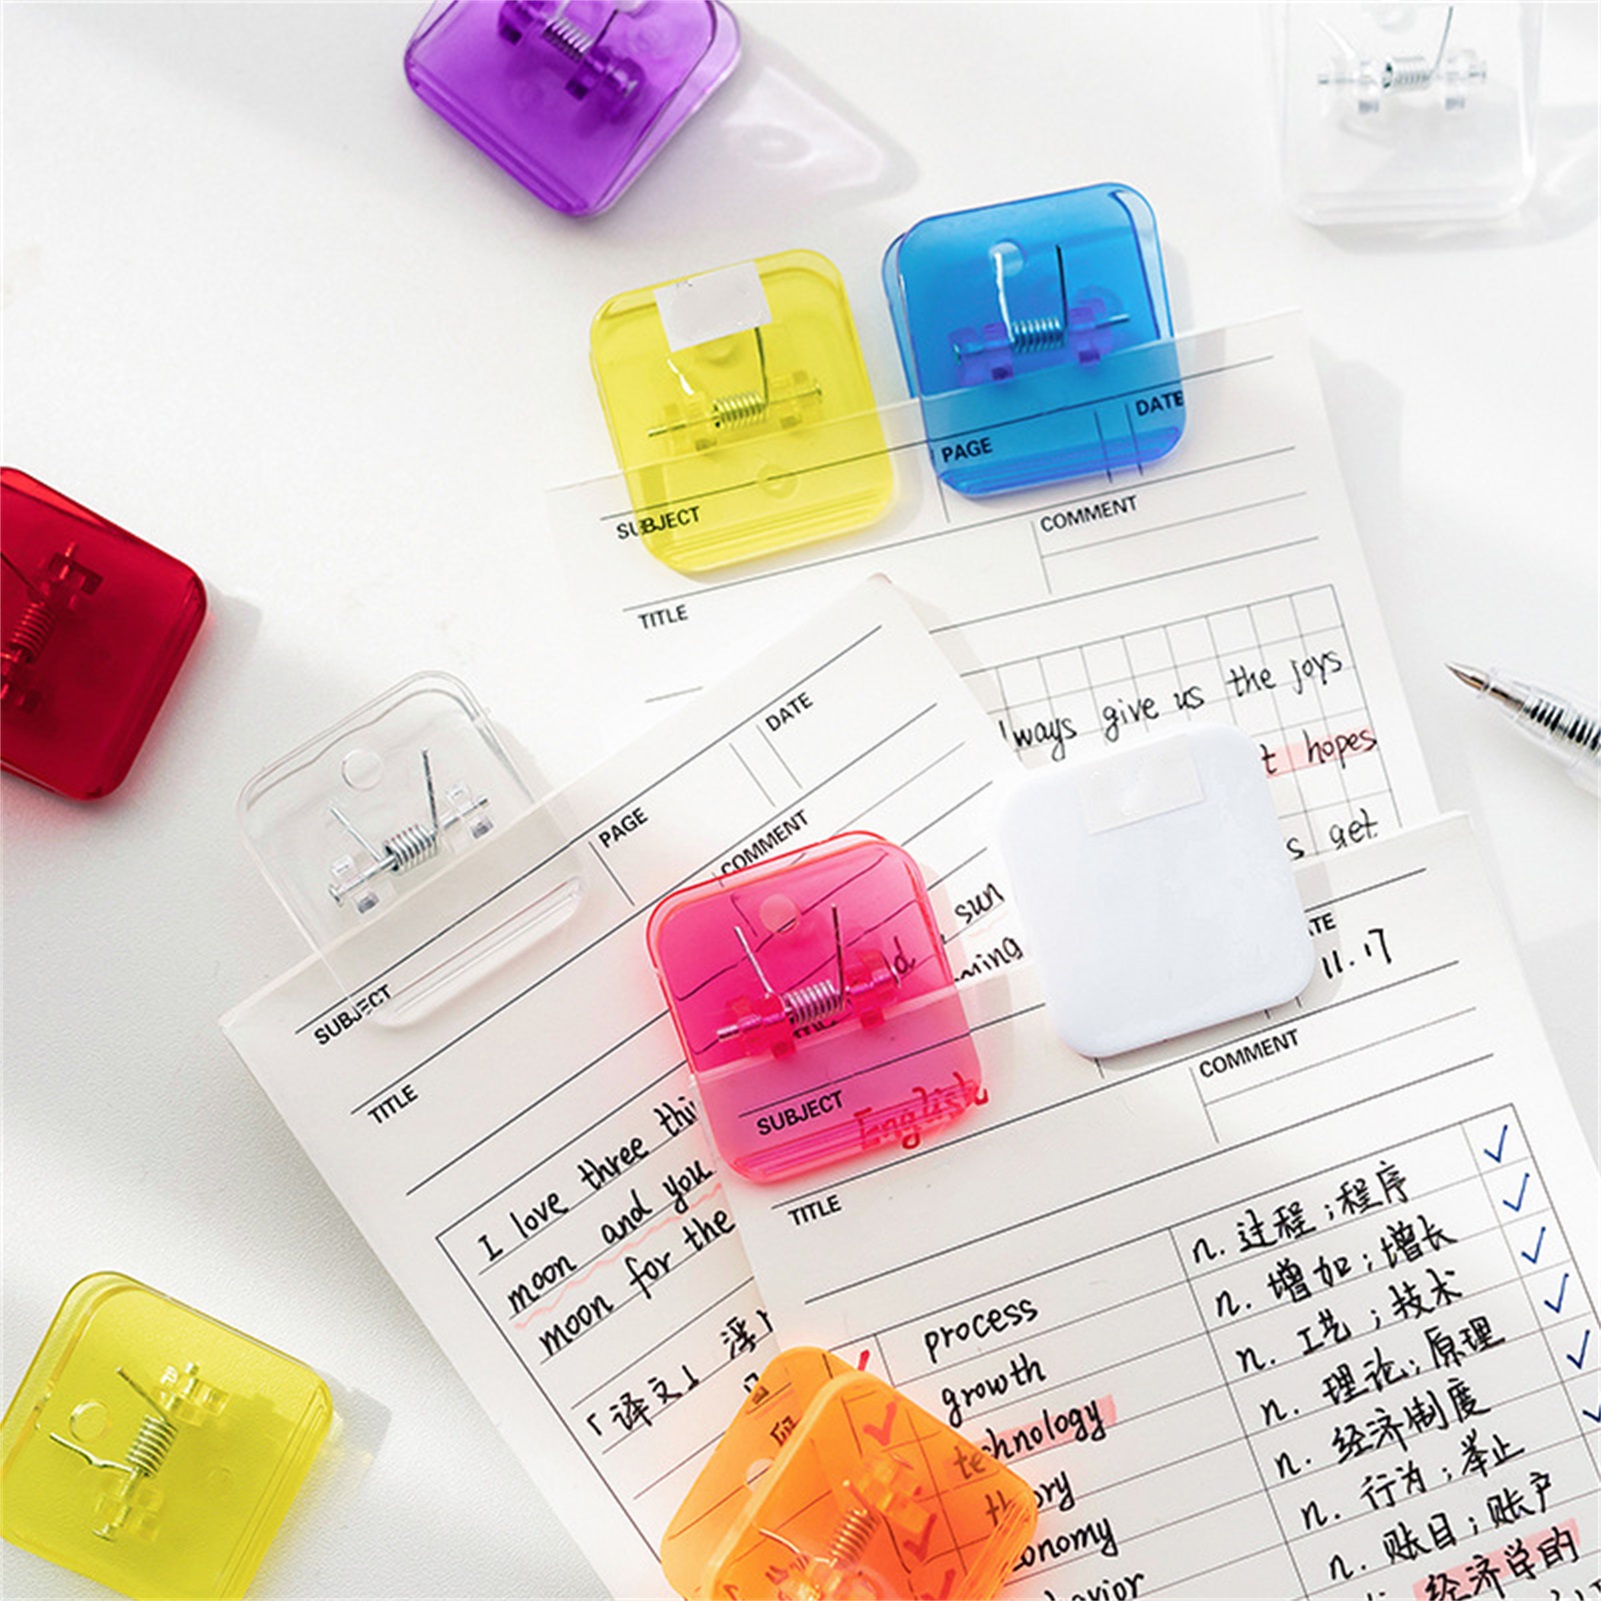 Yesbay 5Pcs File Clip Indeformable Acrylic Widely Used Square Binder Clip Office Supplies - image 4 of 8